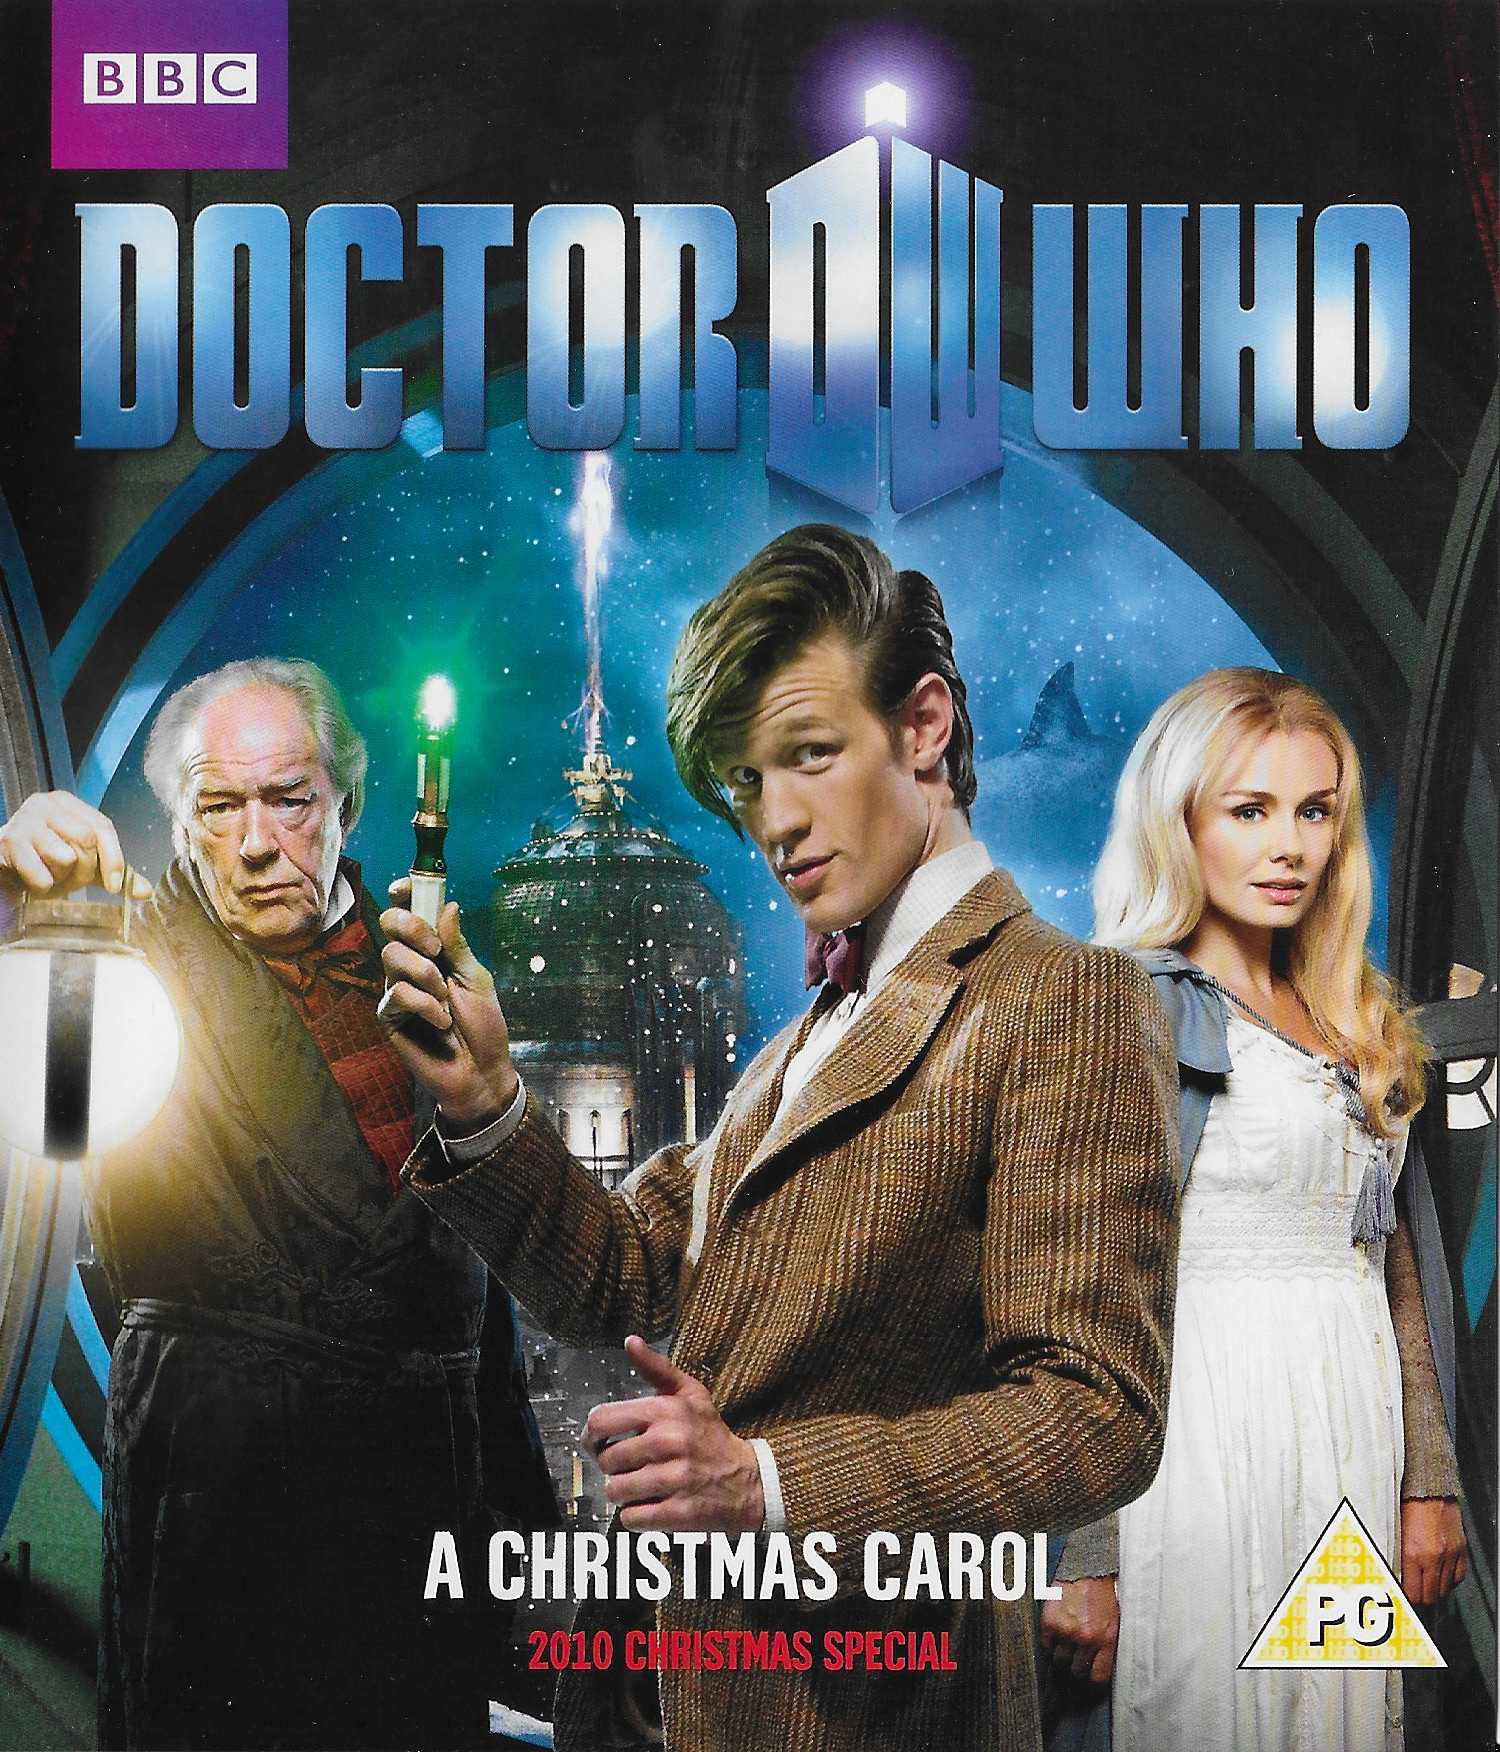 Picture of Doctor Who - A Christmas carol by artist Steven Moffat from the BBC blu-rays - Records and Tapes library